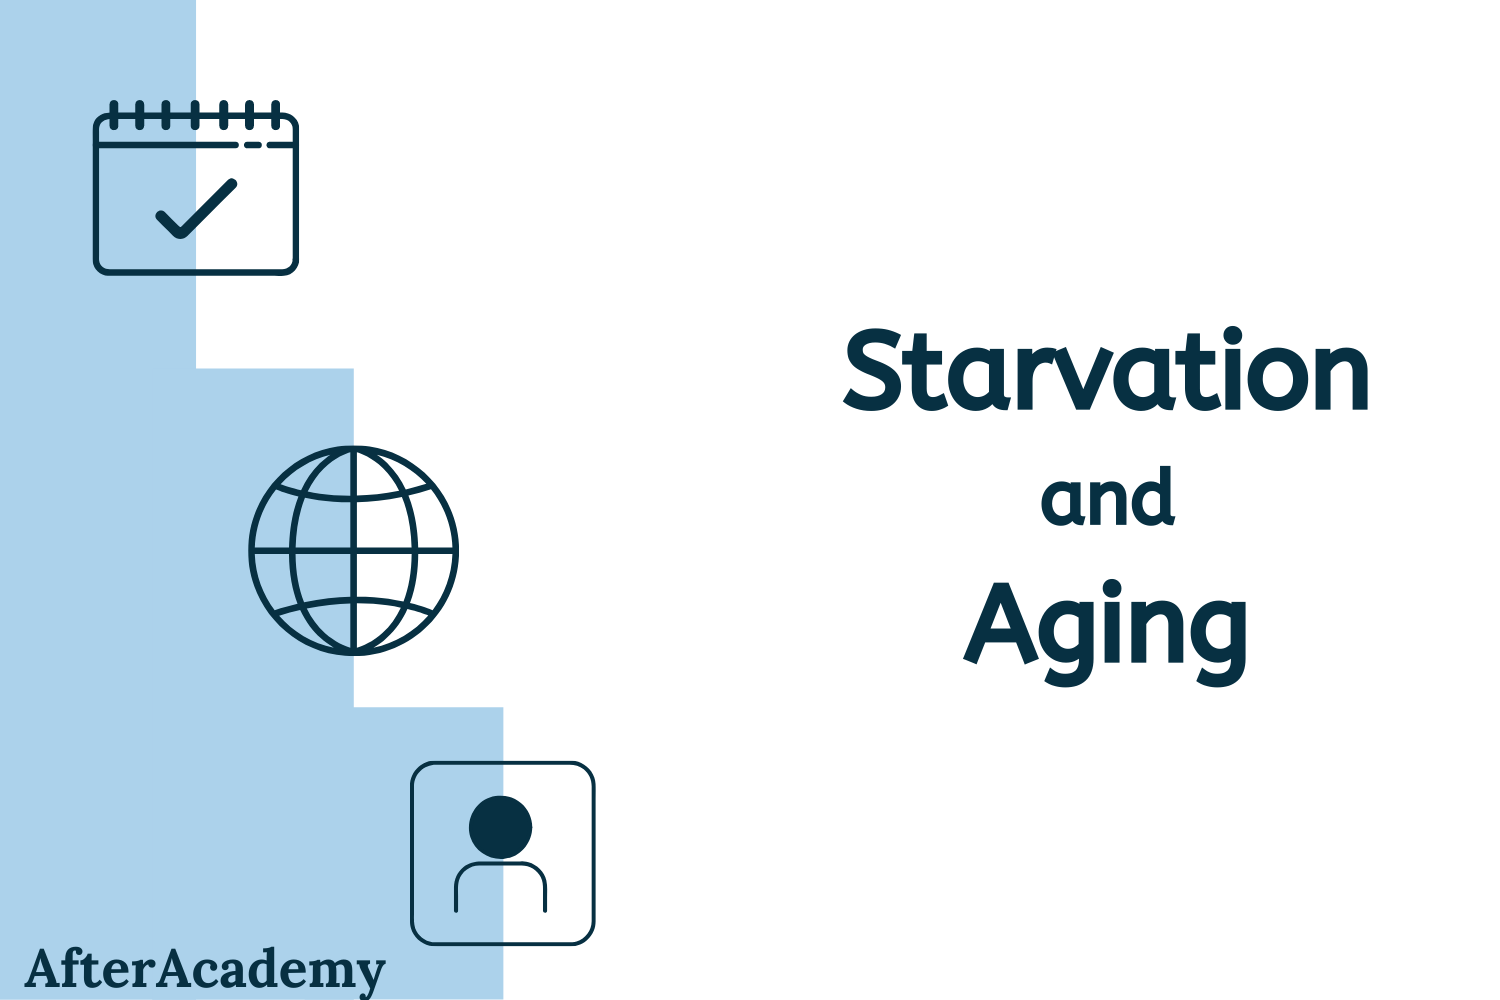 What is Starvation and Aging?